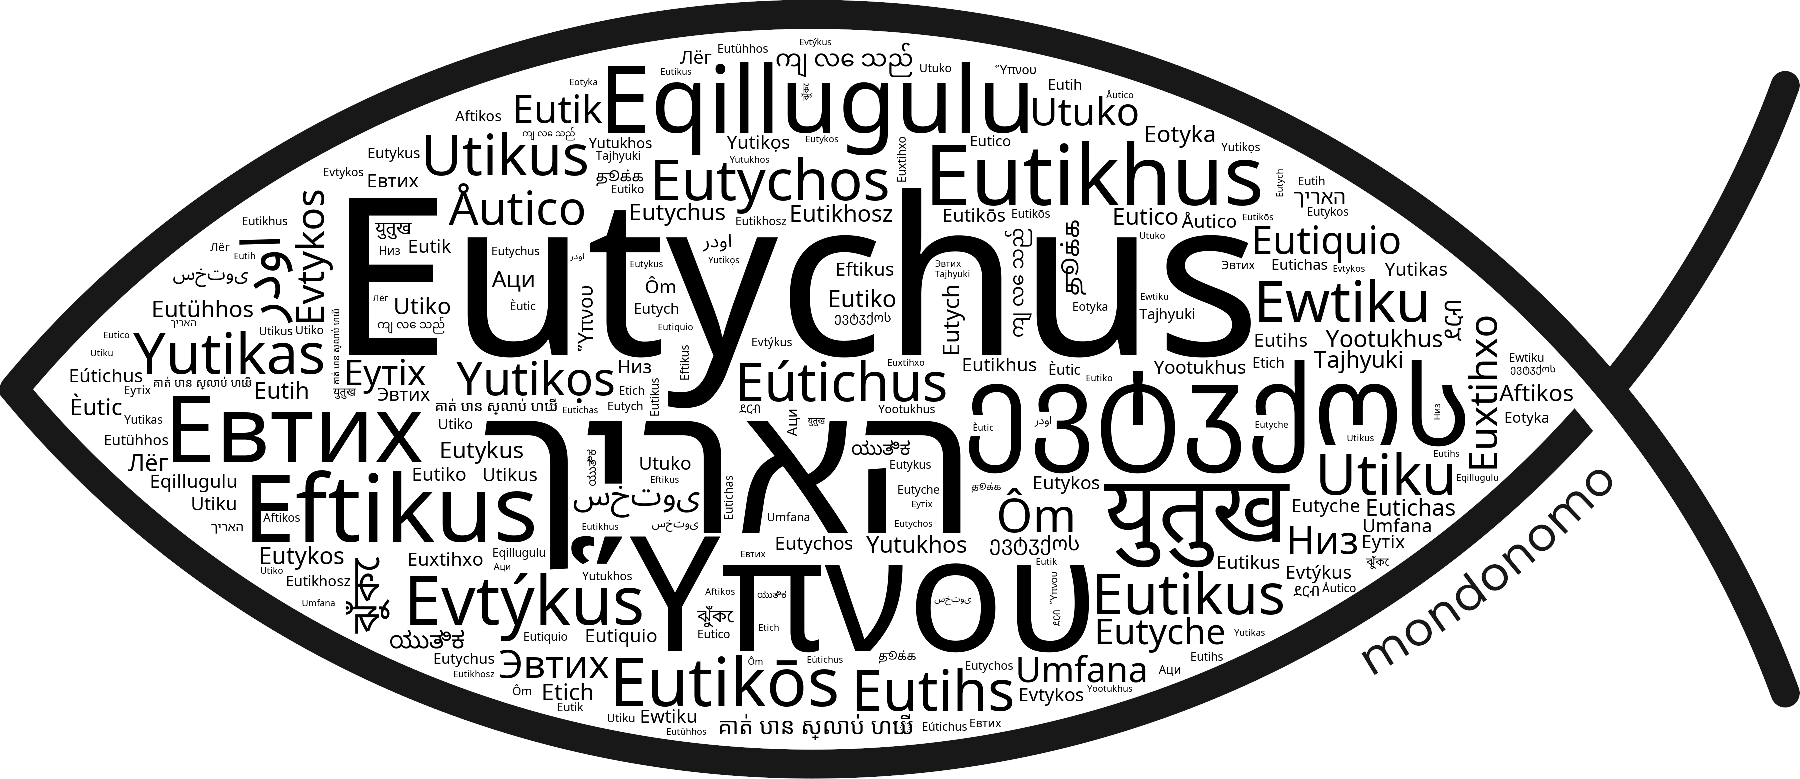 Name Eutychus in the world's Bibles